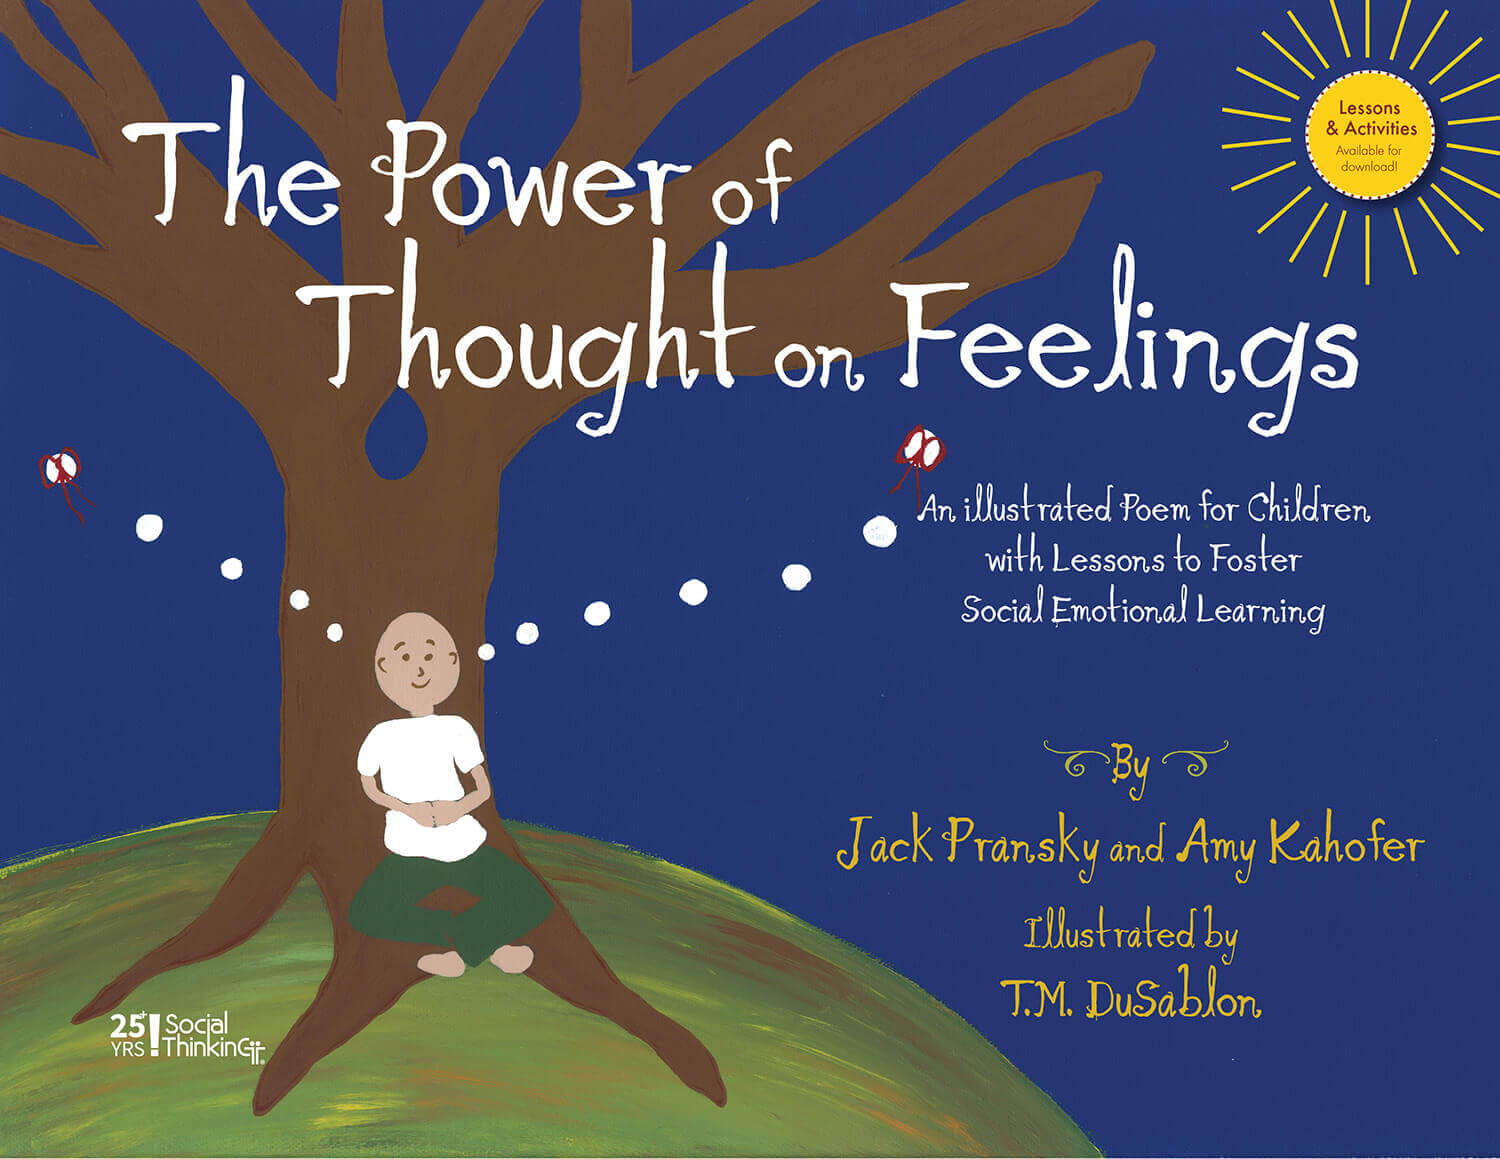 on　Thought　Socialthinking　The　of　Power　Feelings